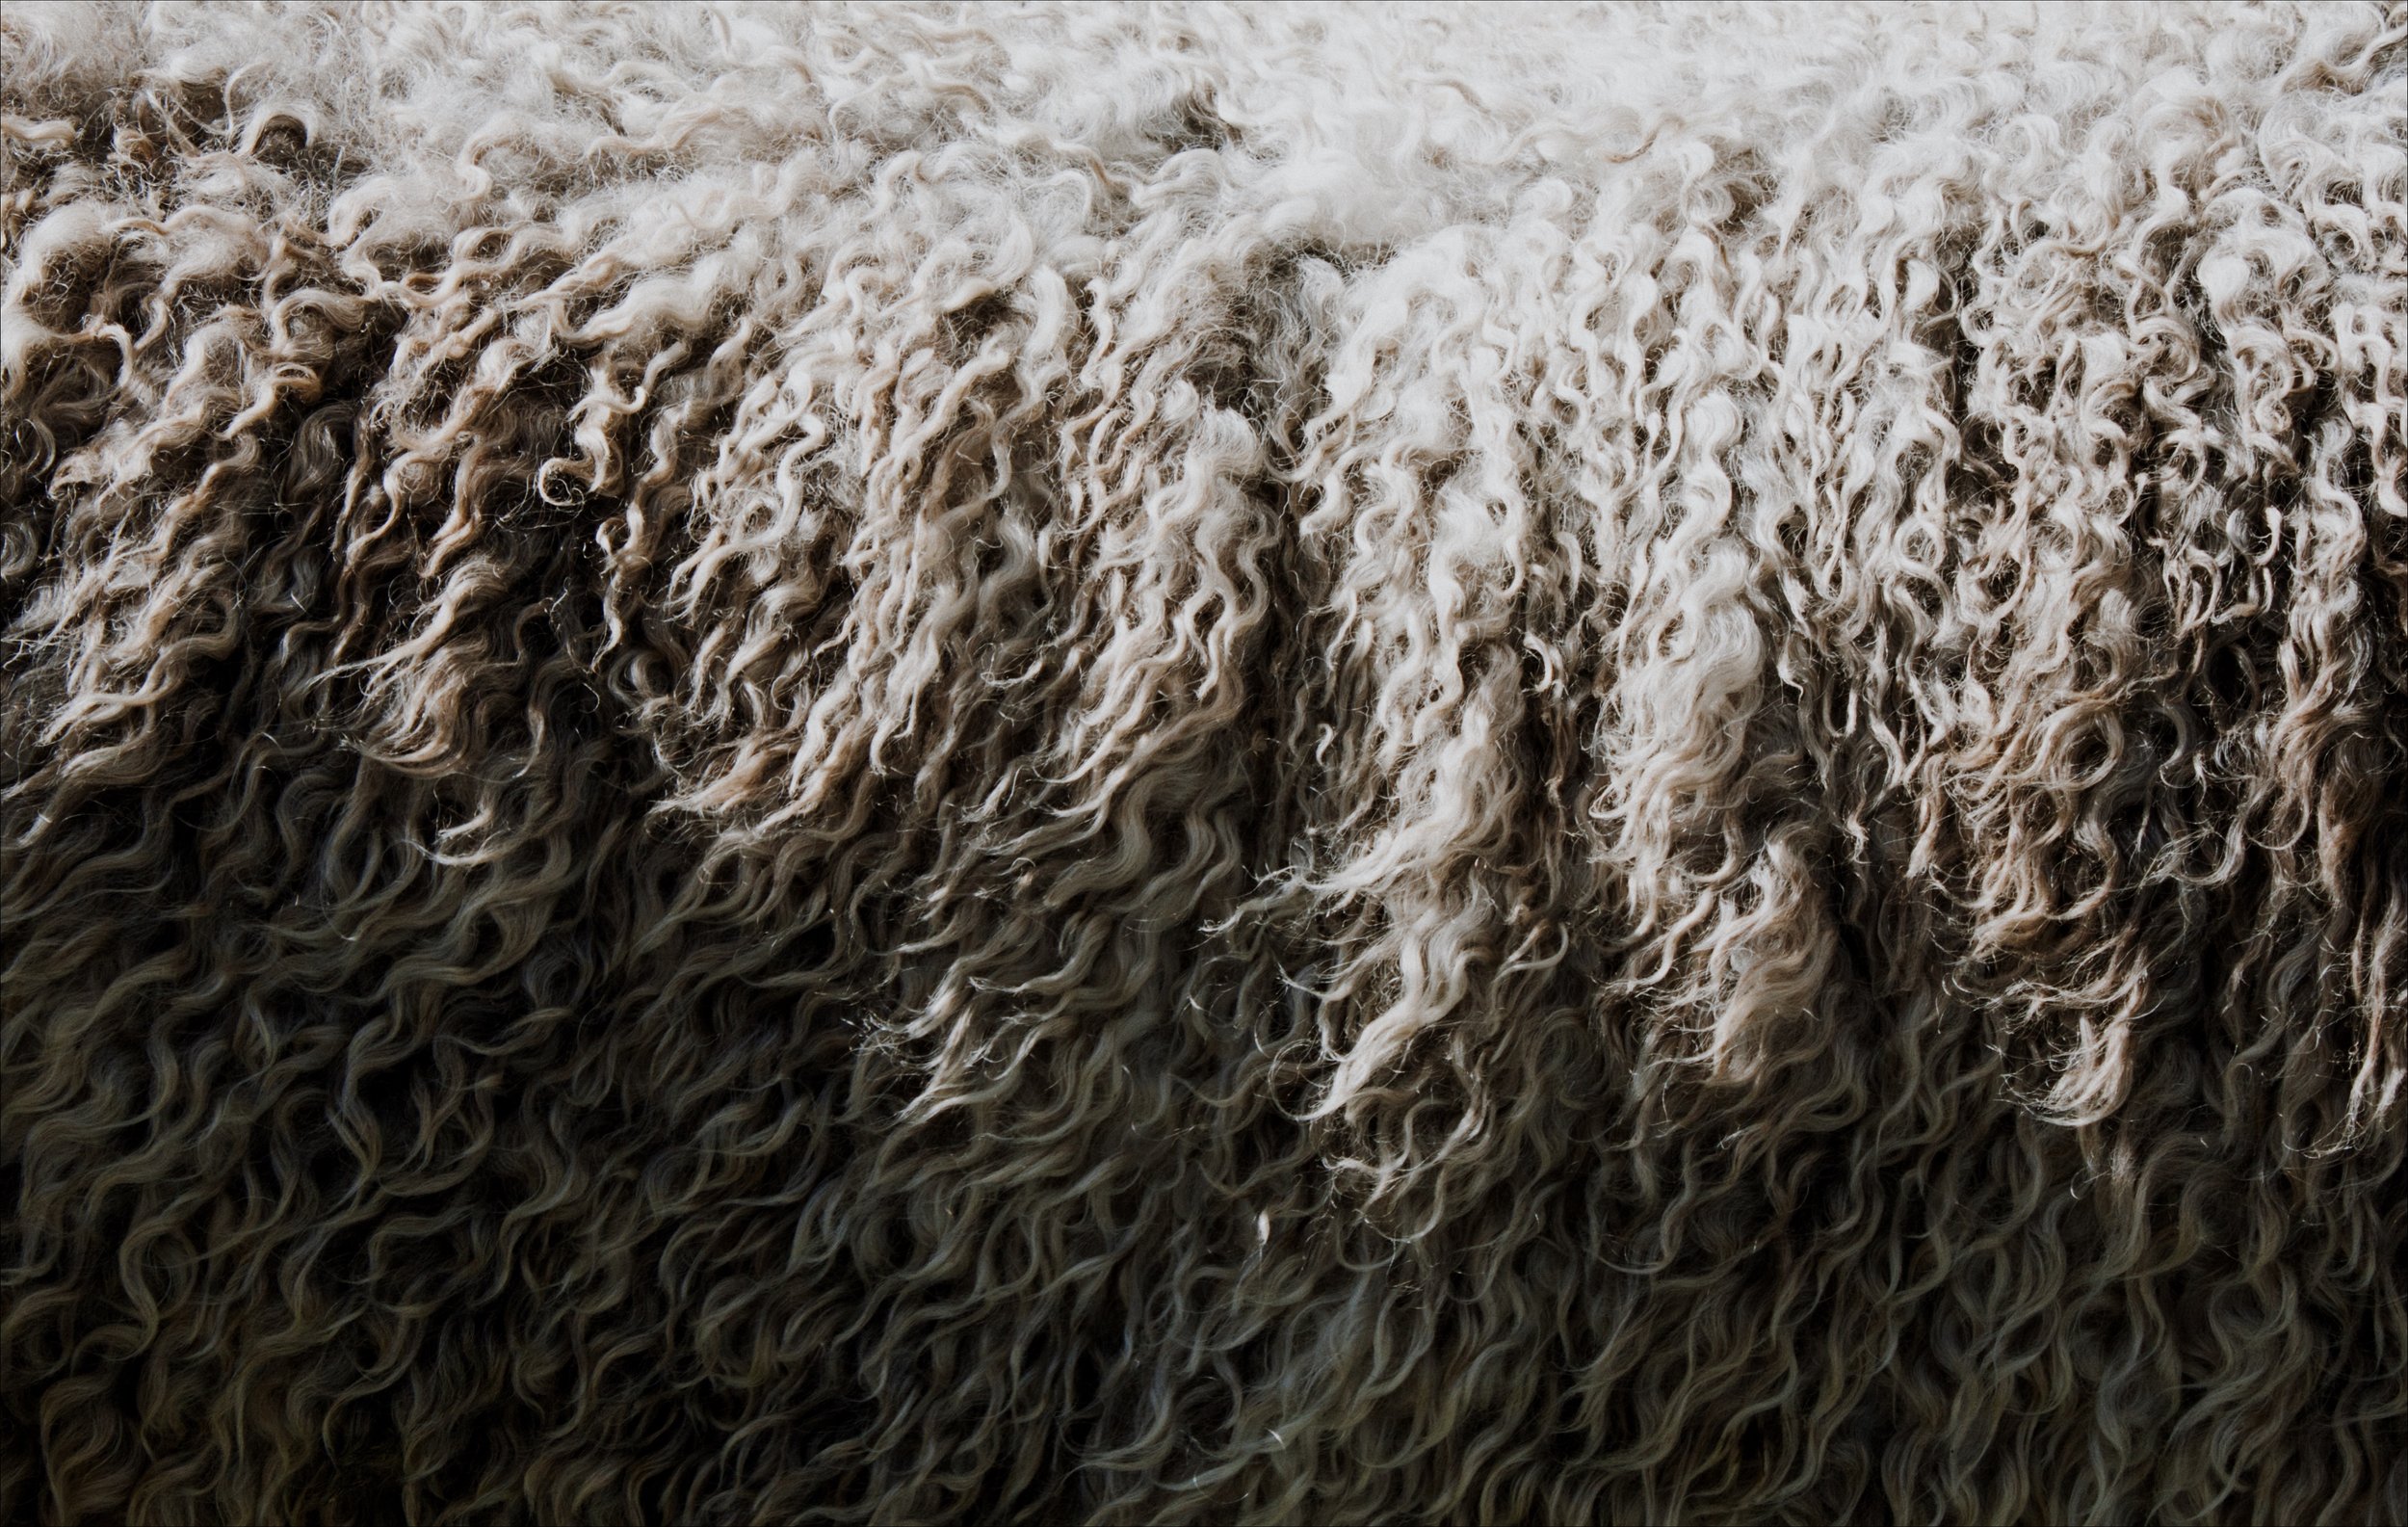 Left: New Zealand wool. Photo by Vince Veras. 